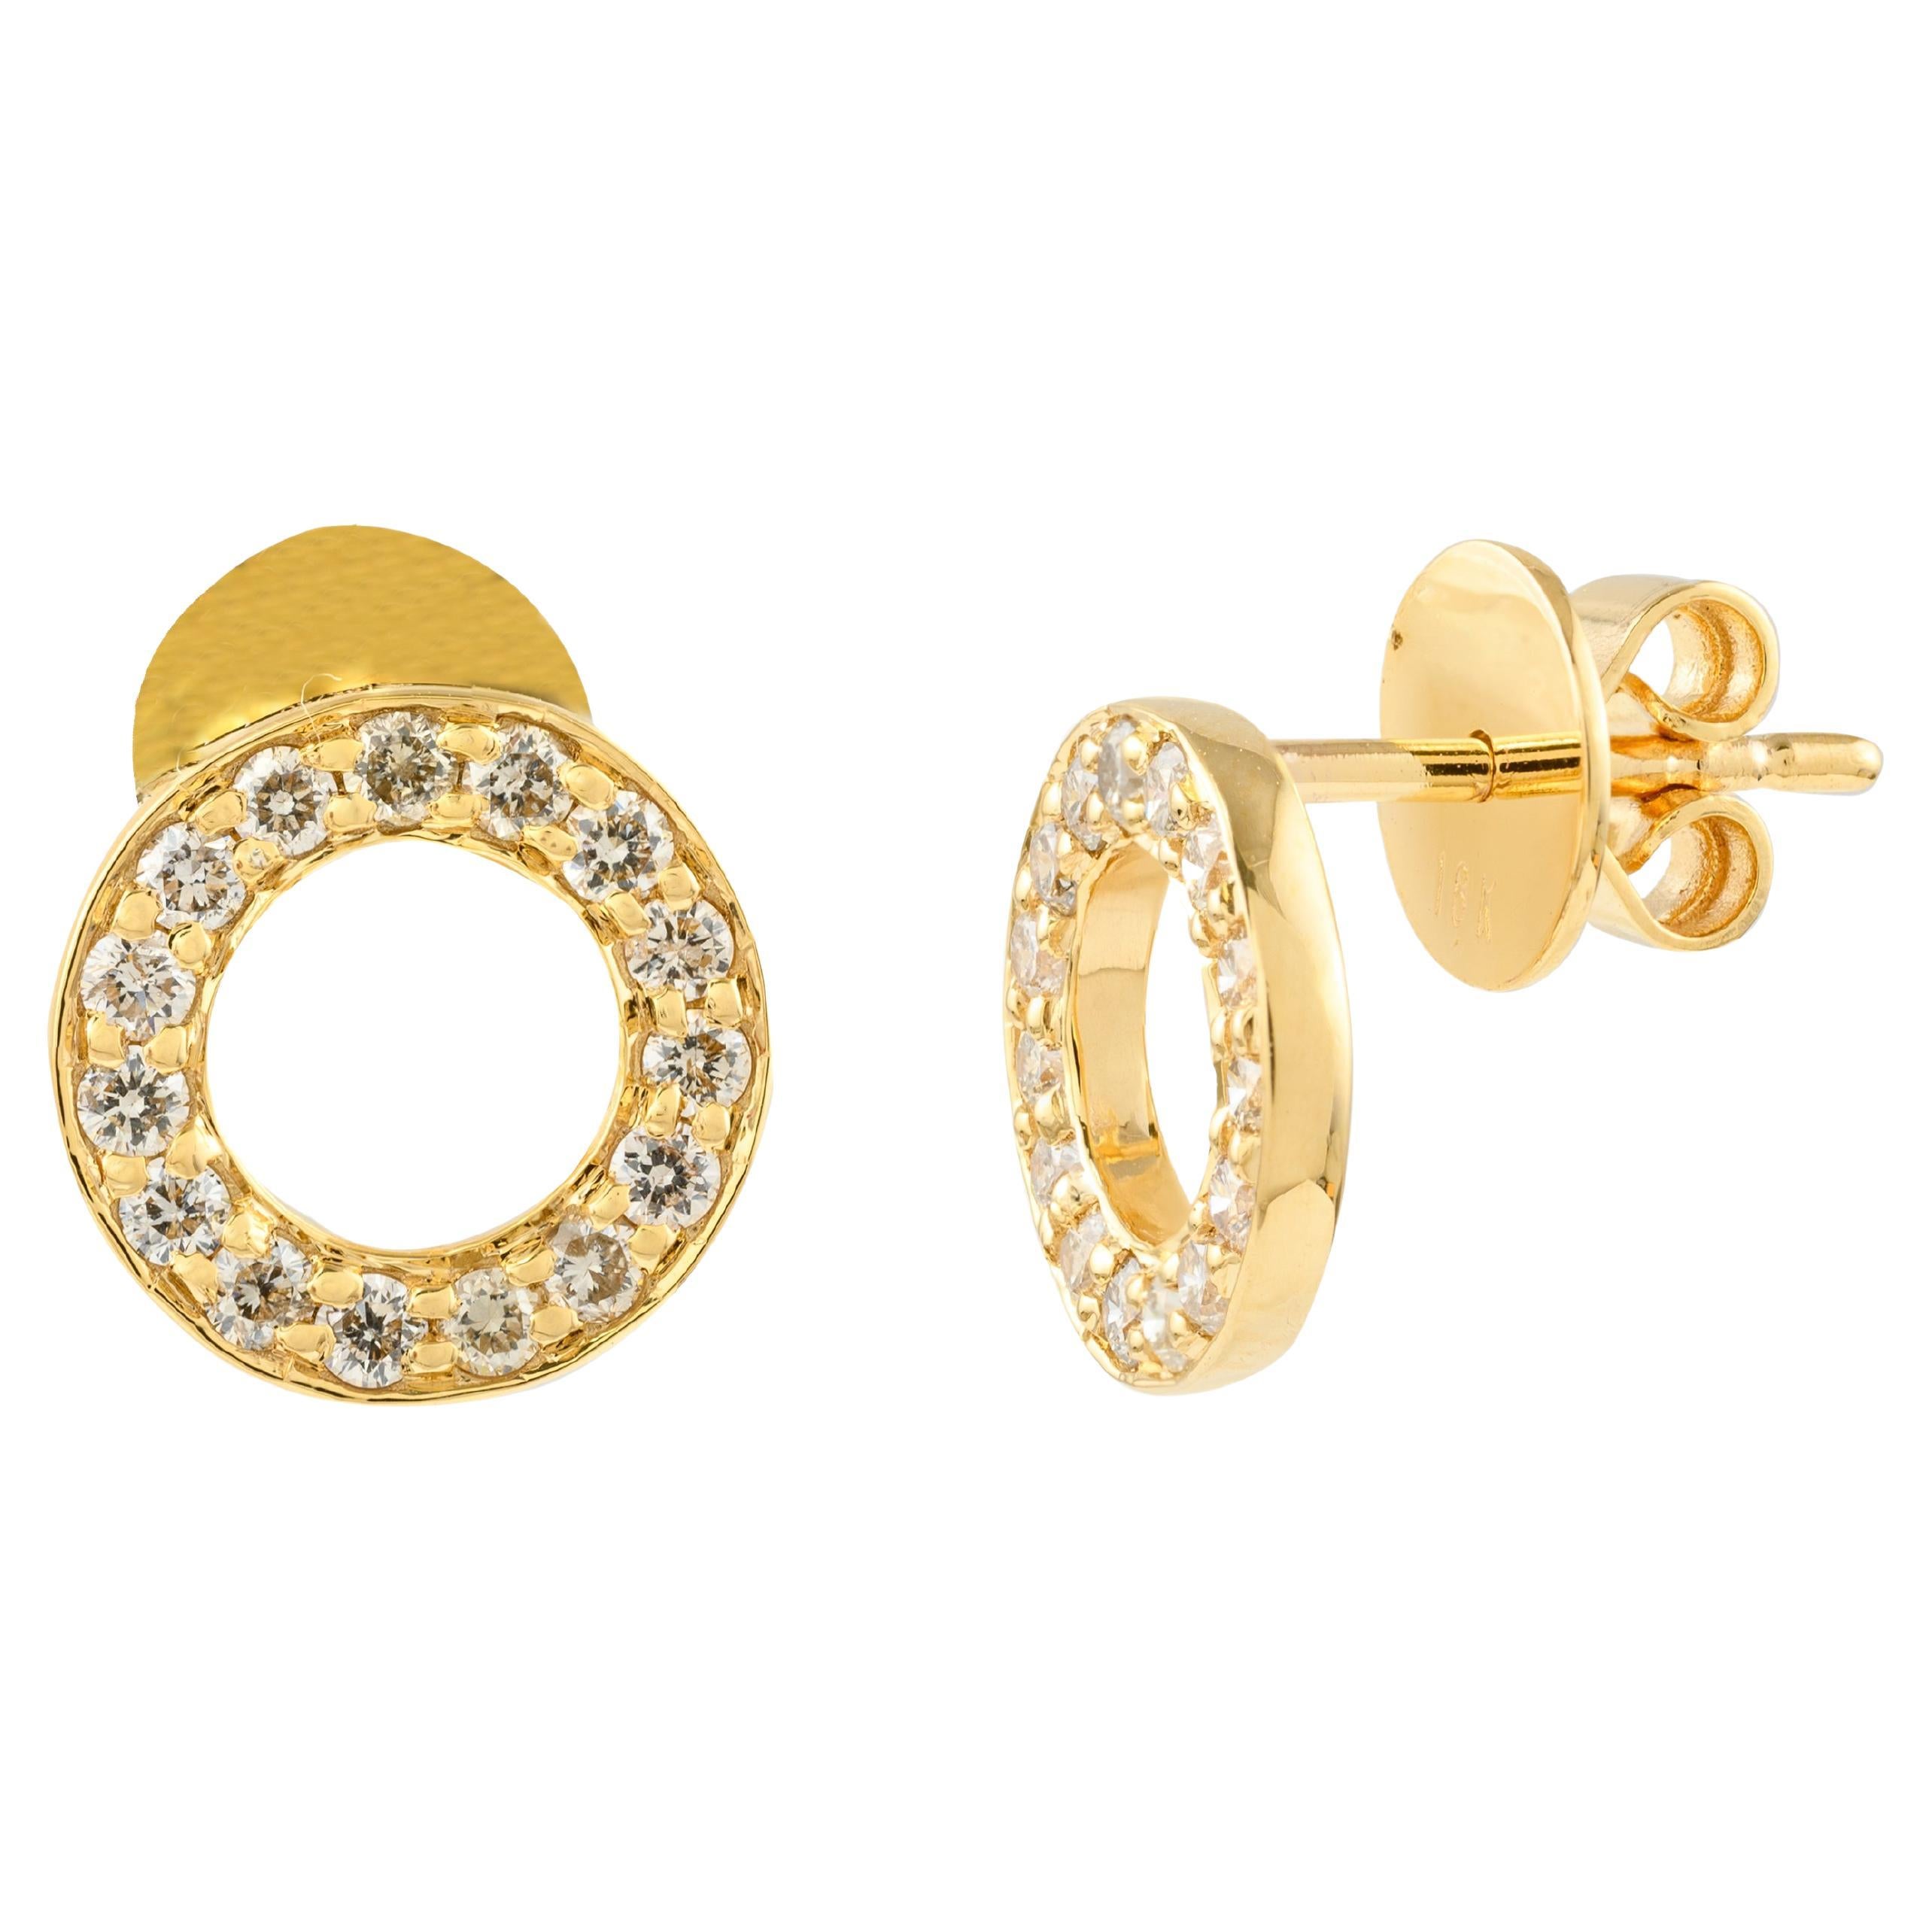 Boucles d'oreilles Minimalist Circle Diamond Stud Ears Gift For Her in 18k Solid Yellow Gold